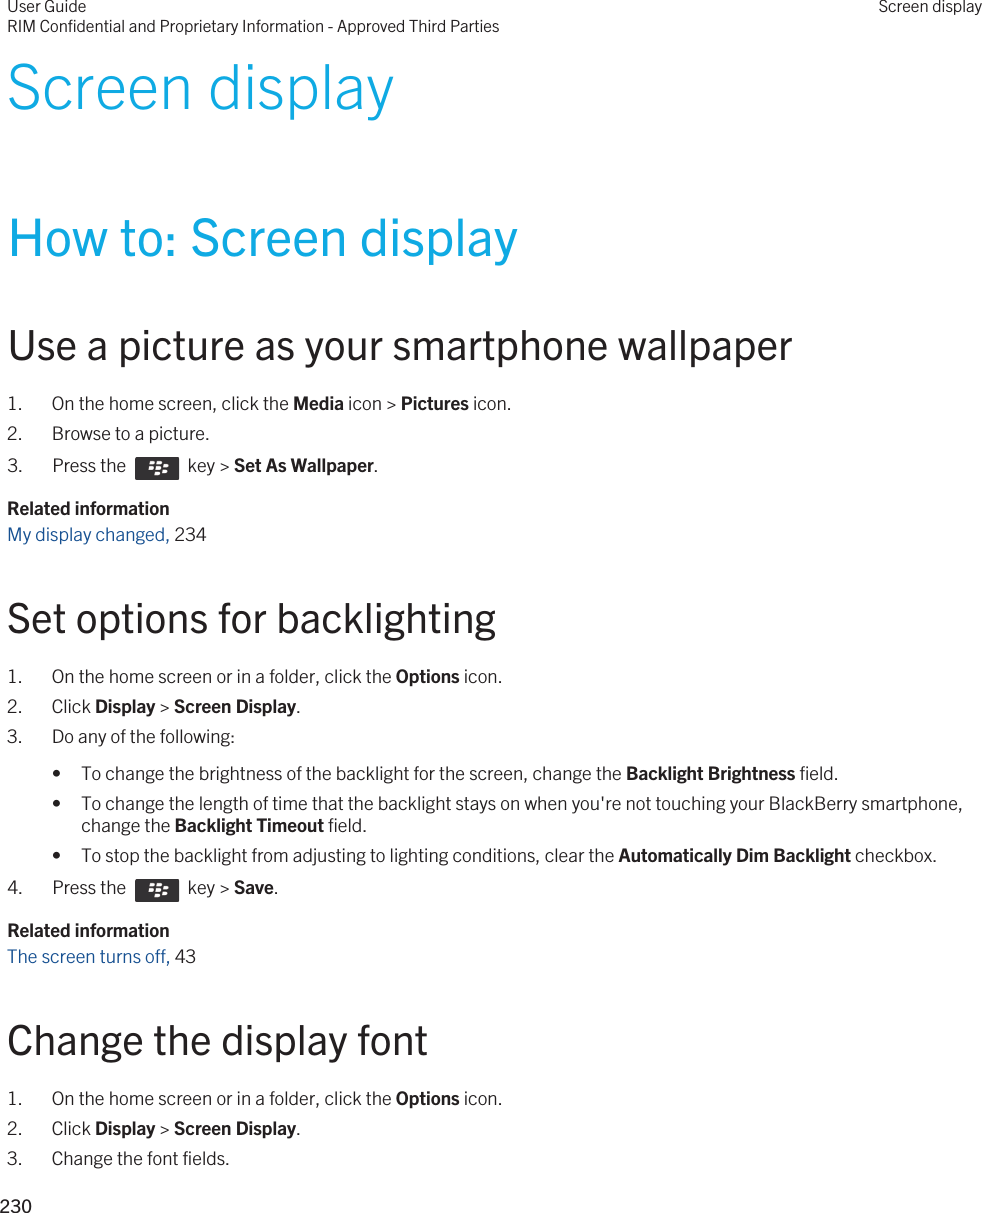 Screen displayHow to: Screen displayUse a picture as your smartphone wallpaper1. On the home screen, click the Media icon &gt; Pictures icon.2. Browse to a picture.3.  Press the    key &gt; Set As Wallpaper. Related informationMy display changed, 234Set options for backlighting1. On the home screen or in a folder, click the Options icon.2. Click Display &gt; Screen Display.3. Do any of the following:• To change the brightness of the backlight for the screen, change the Backlight Brightness field.• To change the length of time that the backlight stays on when you&apos;re not touching your BlackBerry smartphone, change the Backlight Timeout field.• To stop the backlight from adjusting to lighting conditions, clear the Automatically Dim Backlight checkbox.4.  Press the    key &gt; Save. Related informationThe screen turns off, 43 Change the display font1. On the home screen or in a folder, click the Options icon.2. Click Display &gt; Screen Display.3. Change the font fields.User GuideRIM Confidential and Proprietary Information - Approved Third PartiesScreen display230 